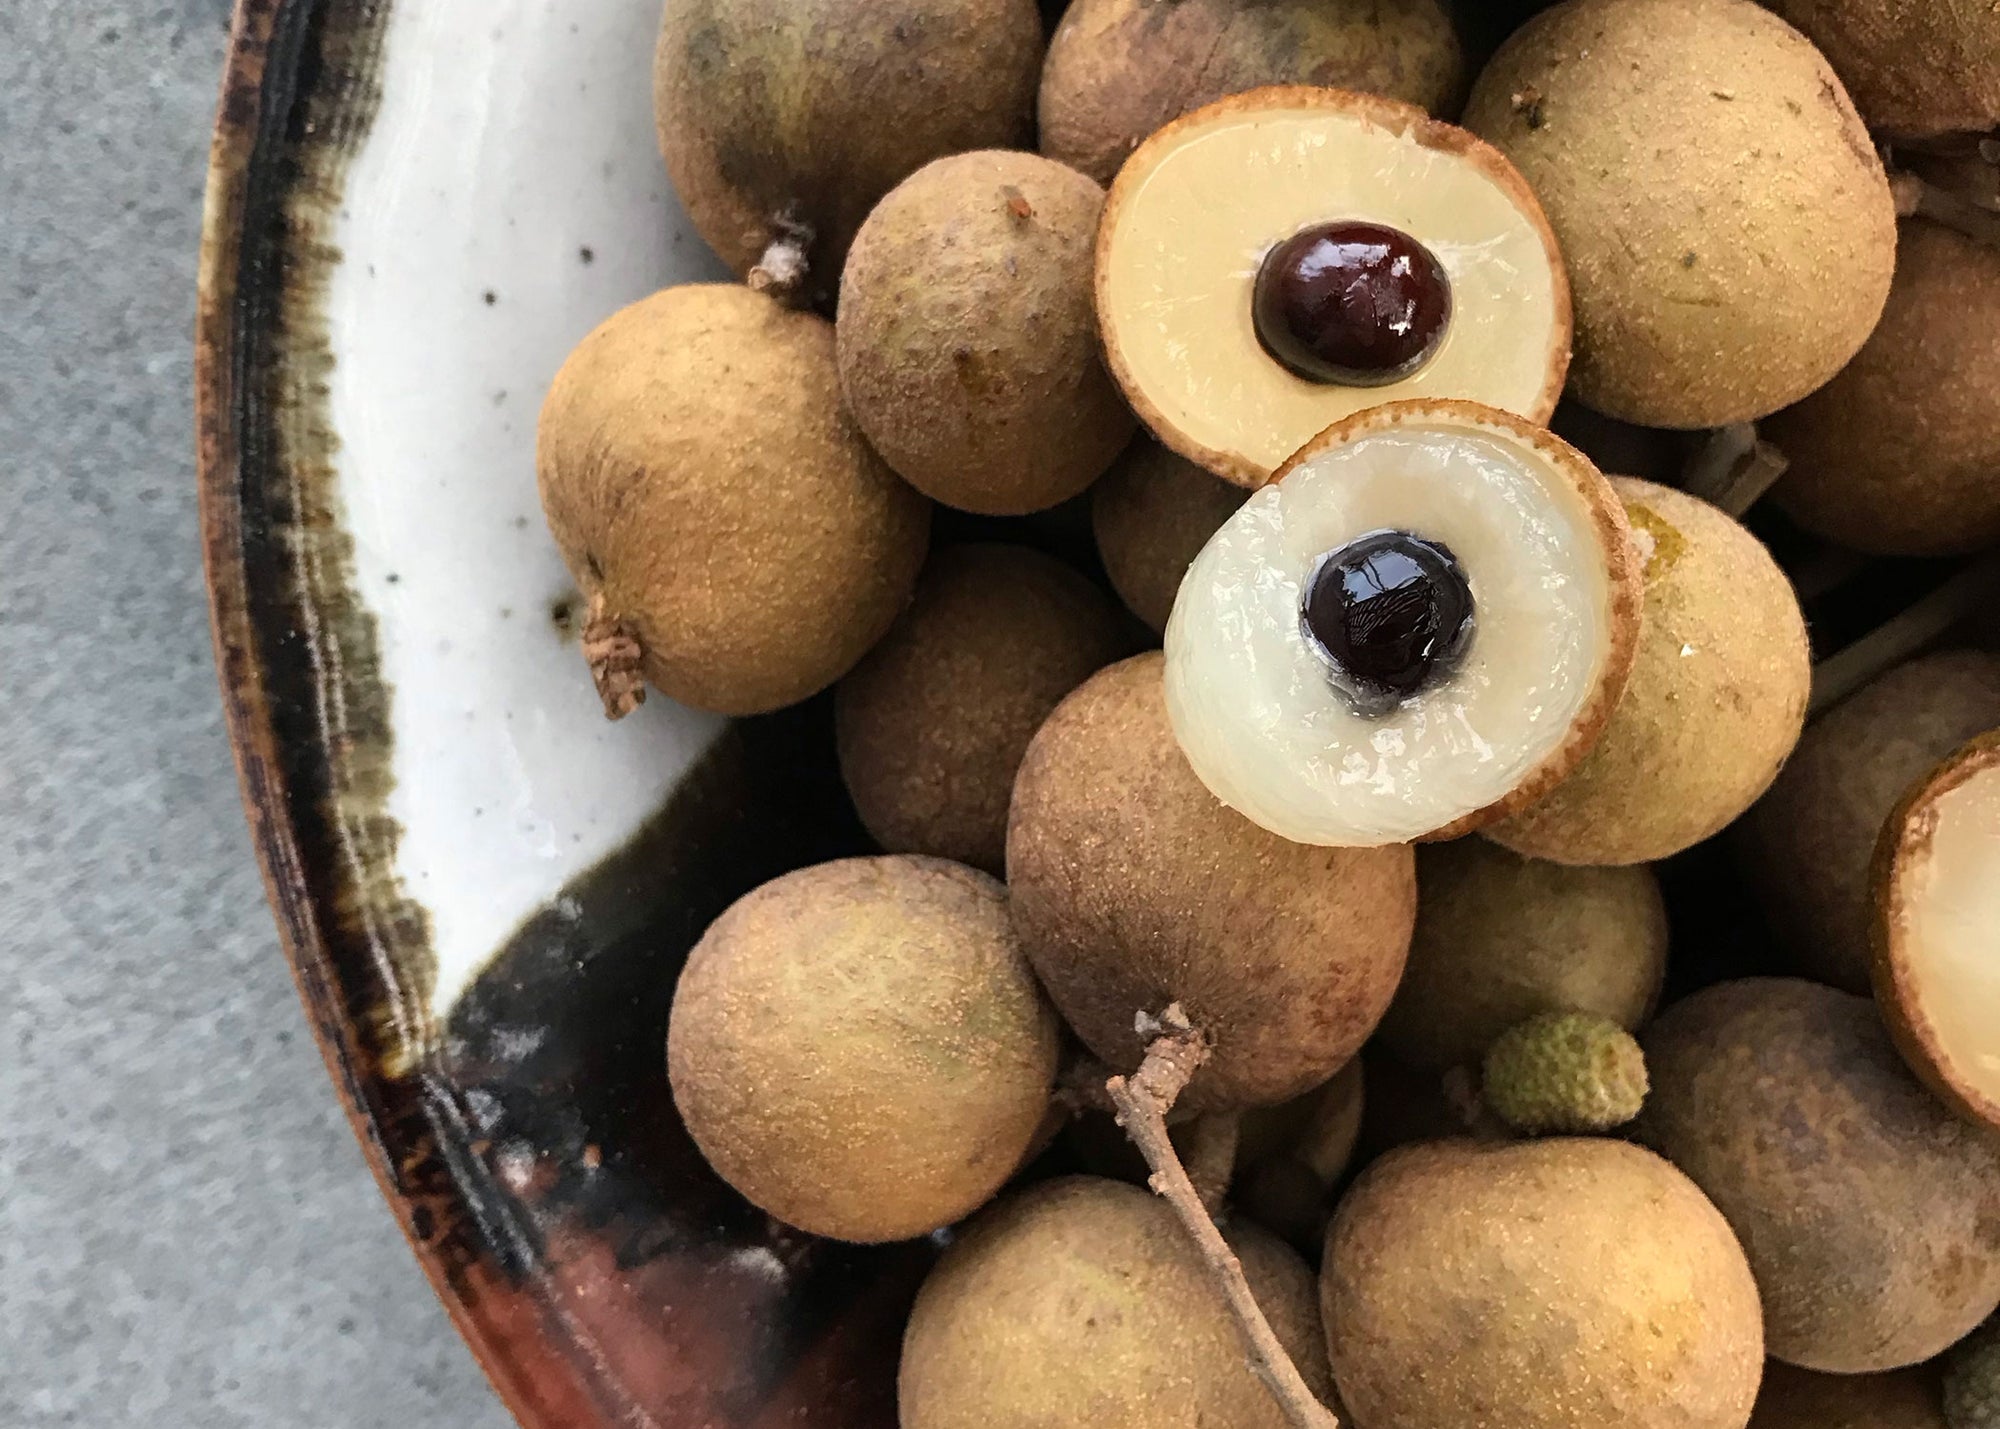 Fresh longan fruit from Hawaii. Image of longan fruit in a bowl with a few fruits open with the seeds and flesh showing.